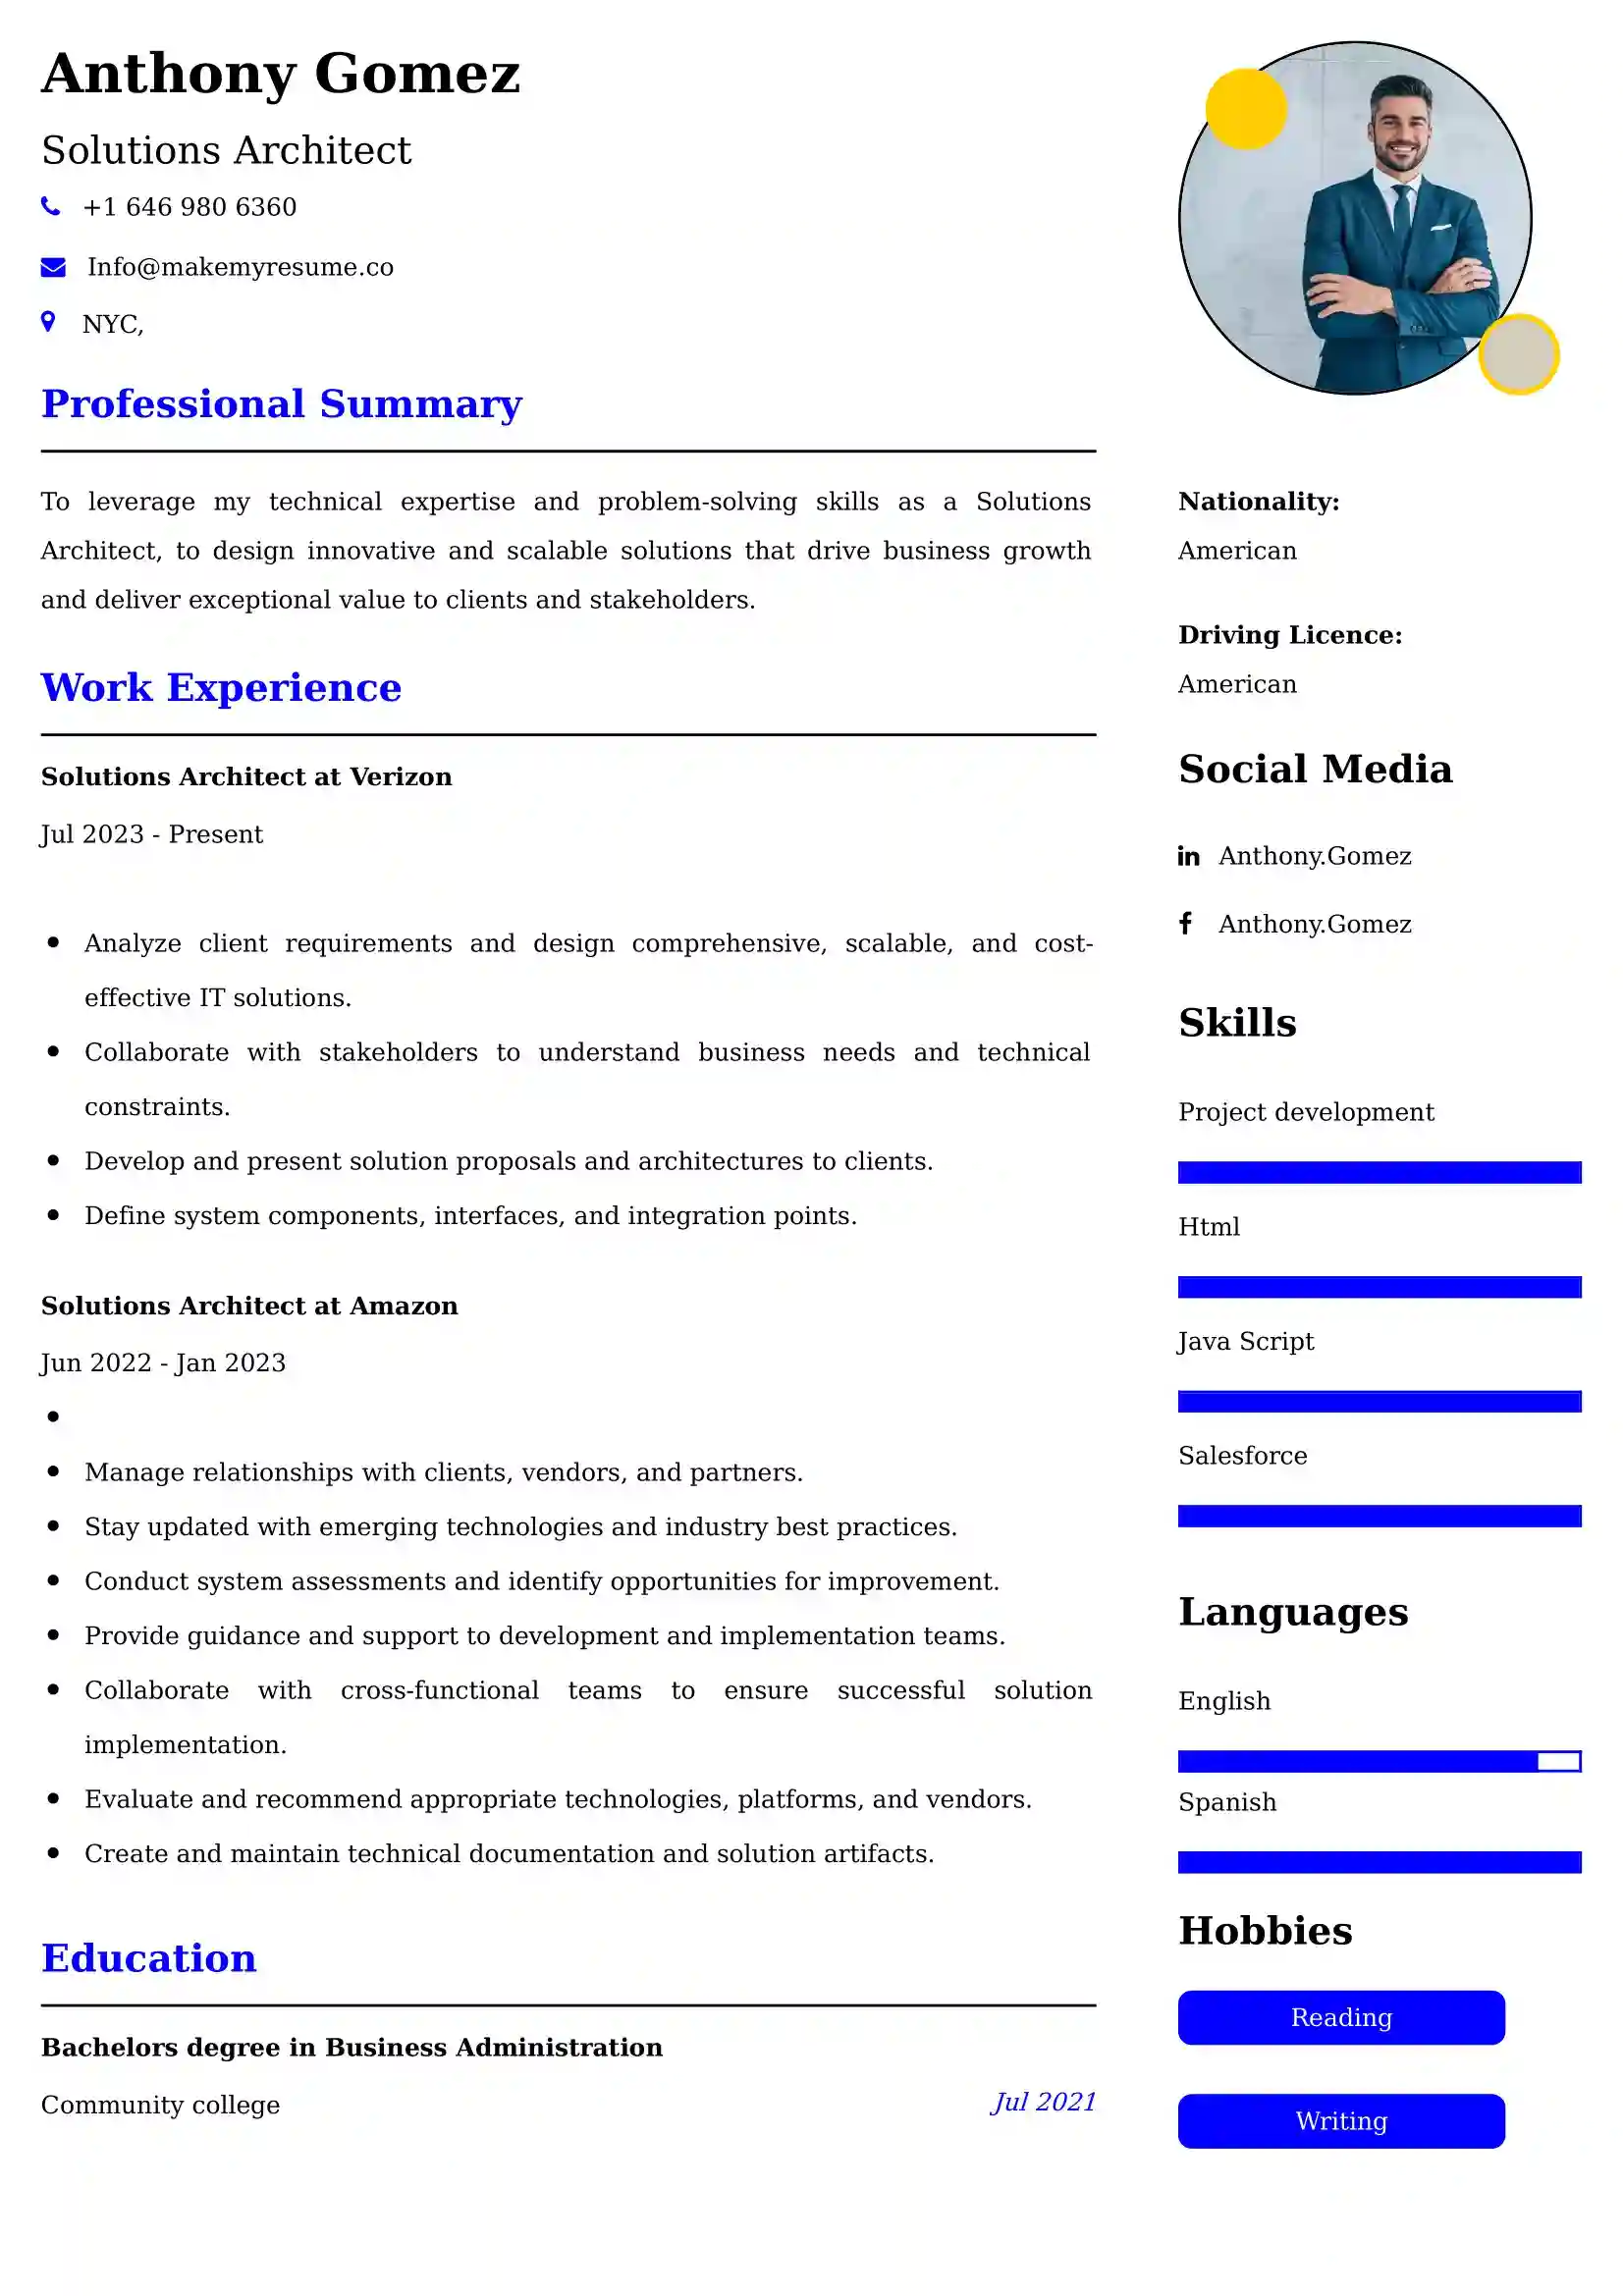 Solutions Architect CV Examples Malaysia